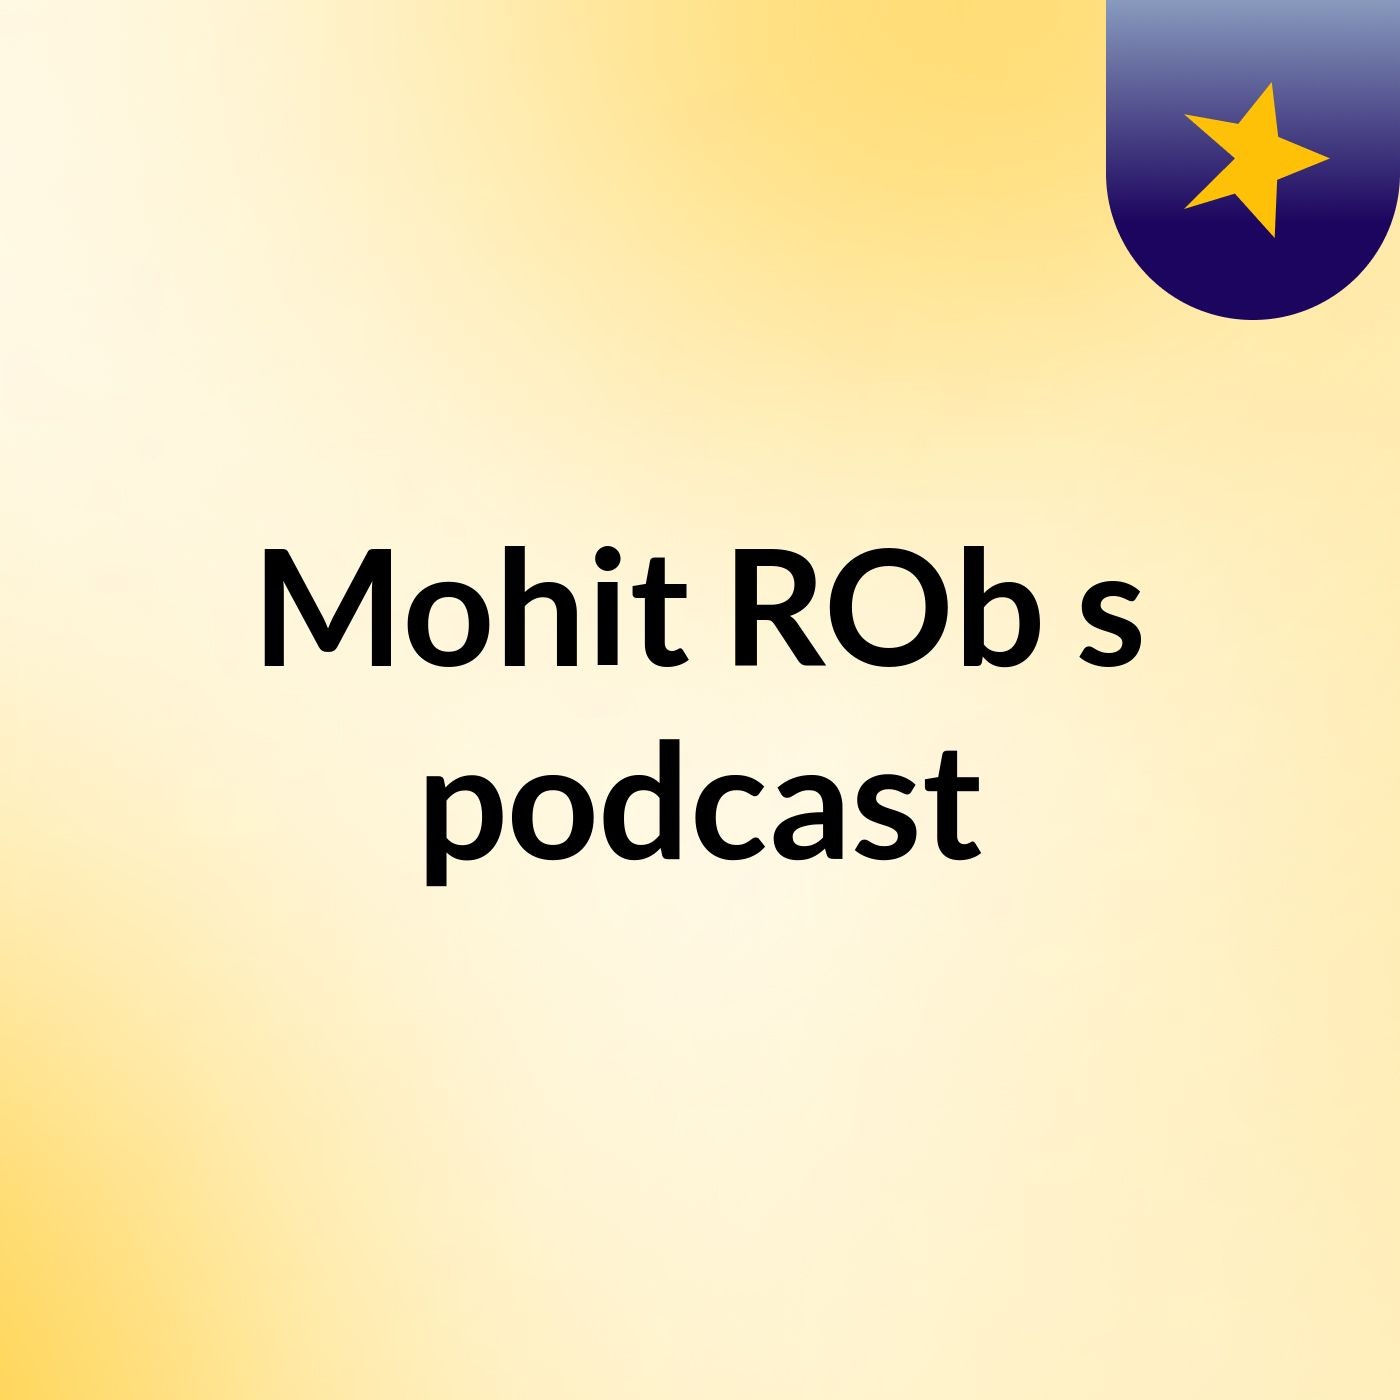 Episode 6 - Mohit ROb's podcast